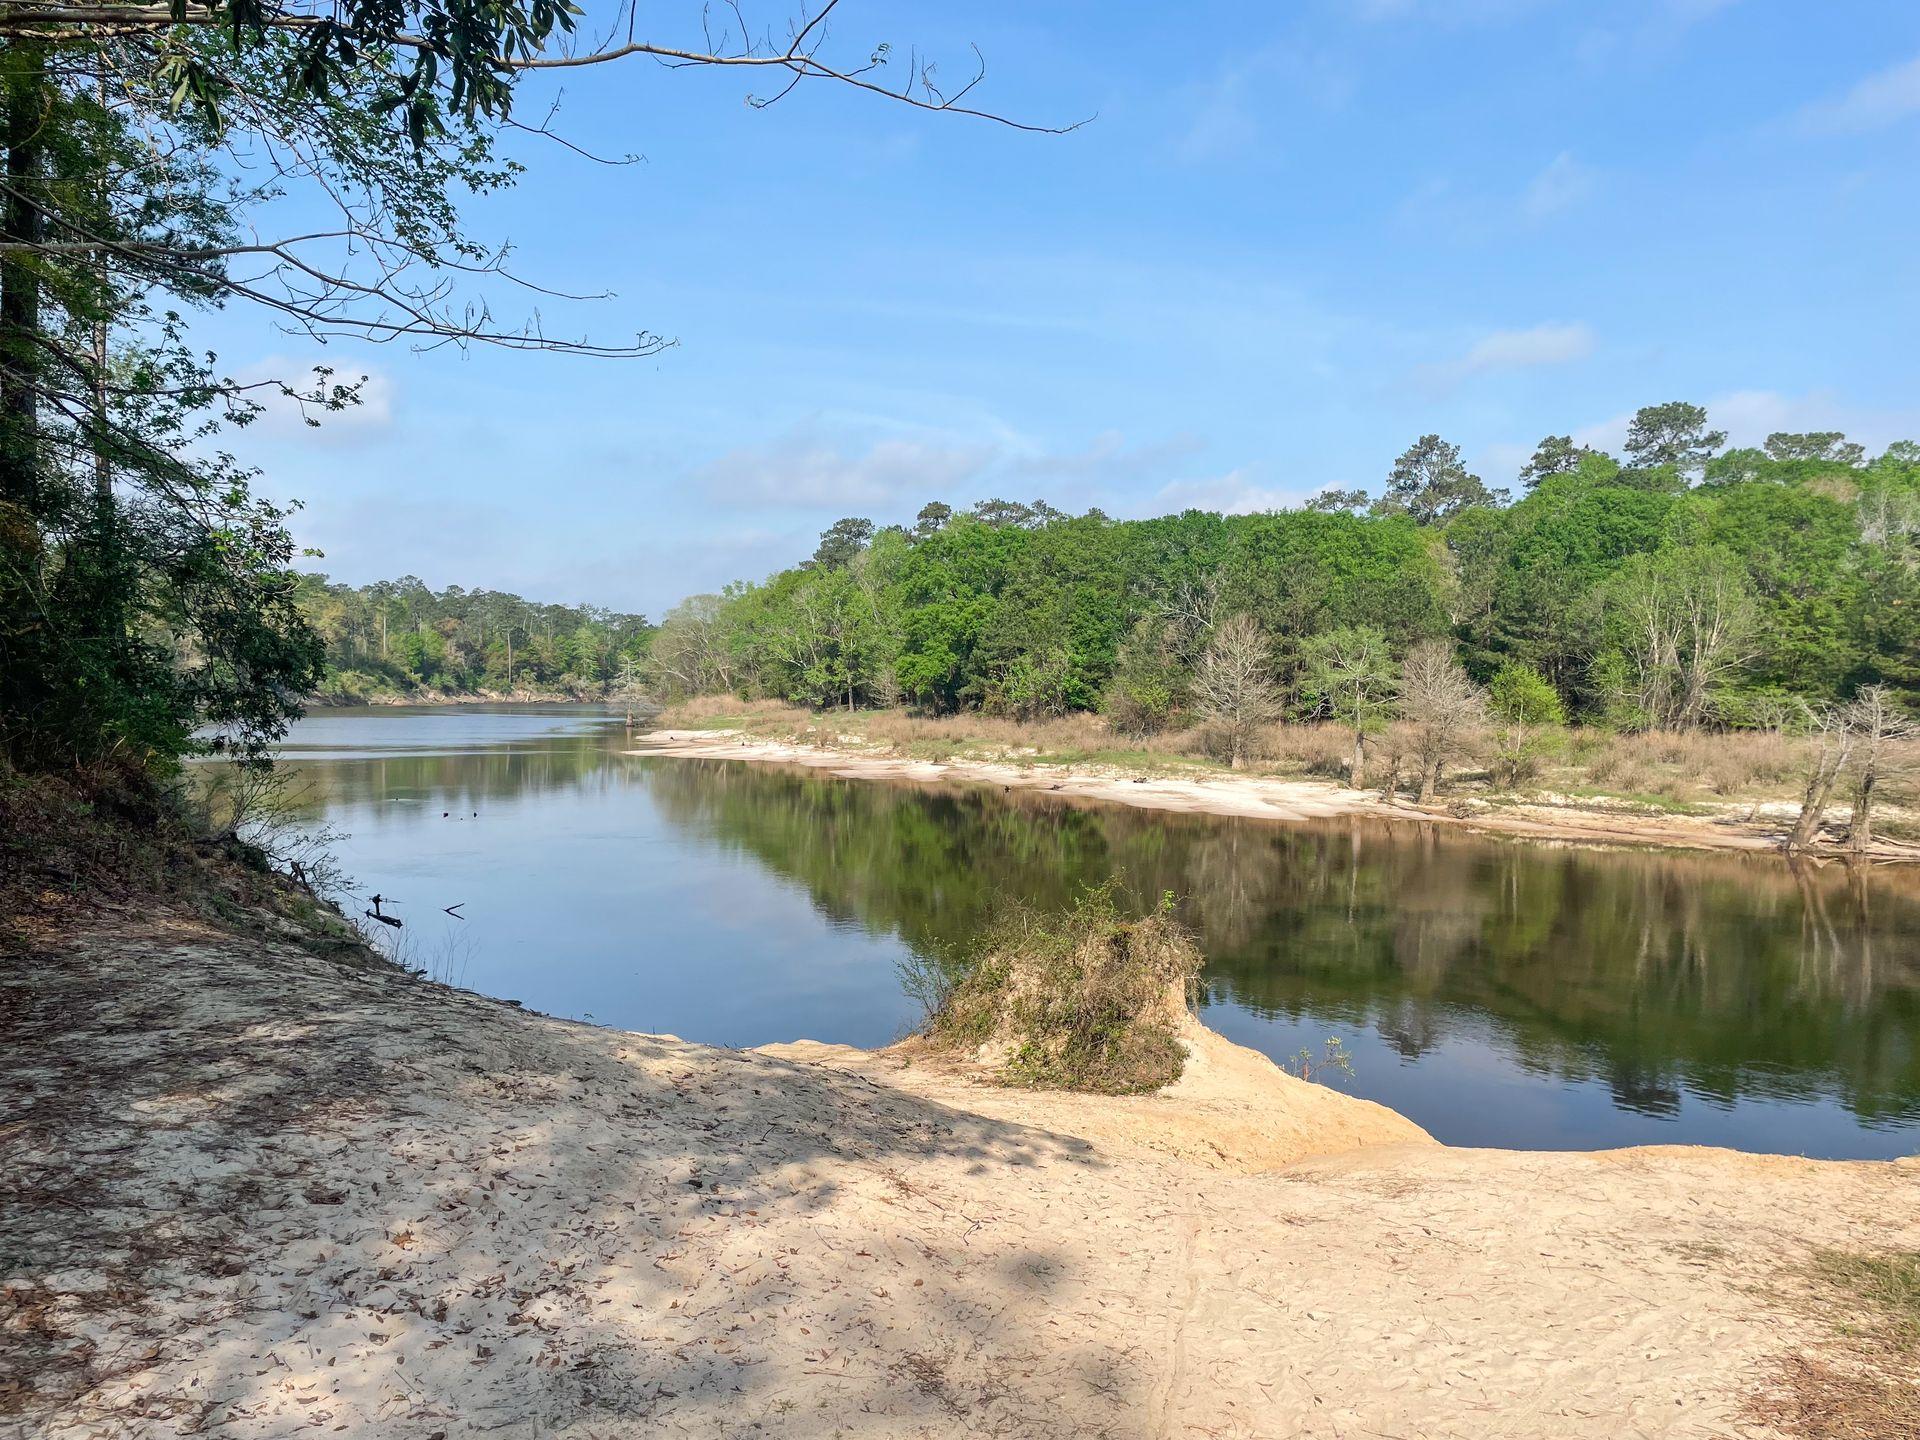 A river surrounded by a sandy shore at Village Creek State Park